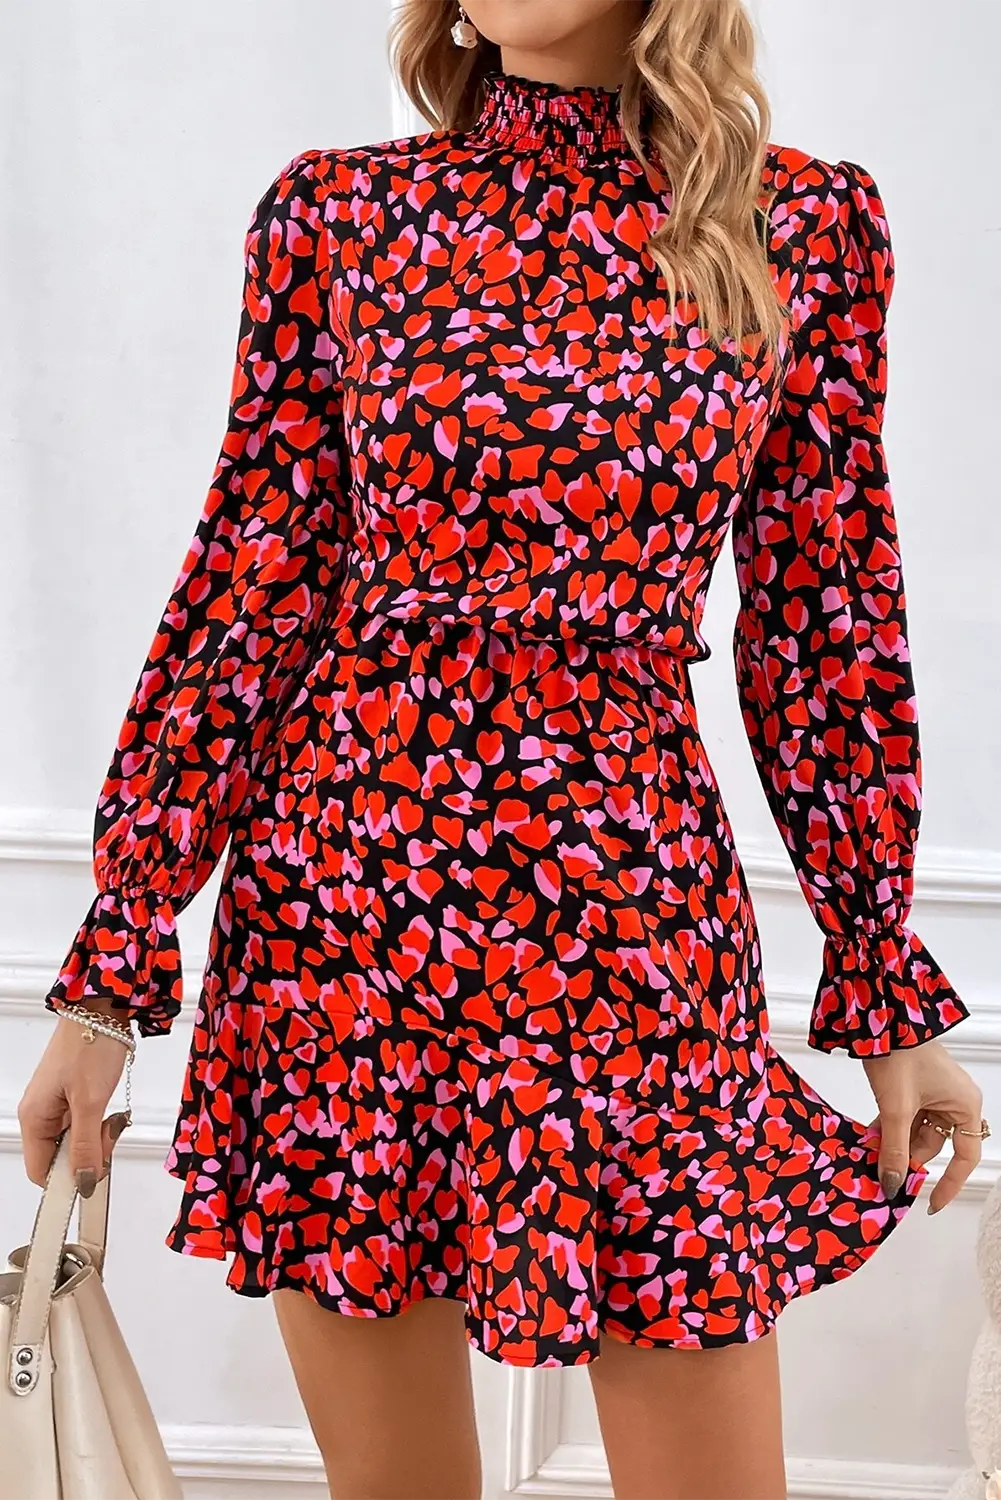 Red valentines day heart shape print long sleeve mini dress - l / 100% polyester - dresses